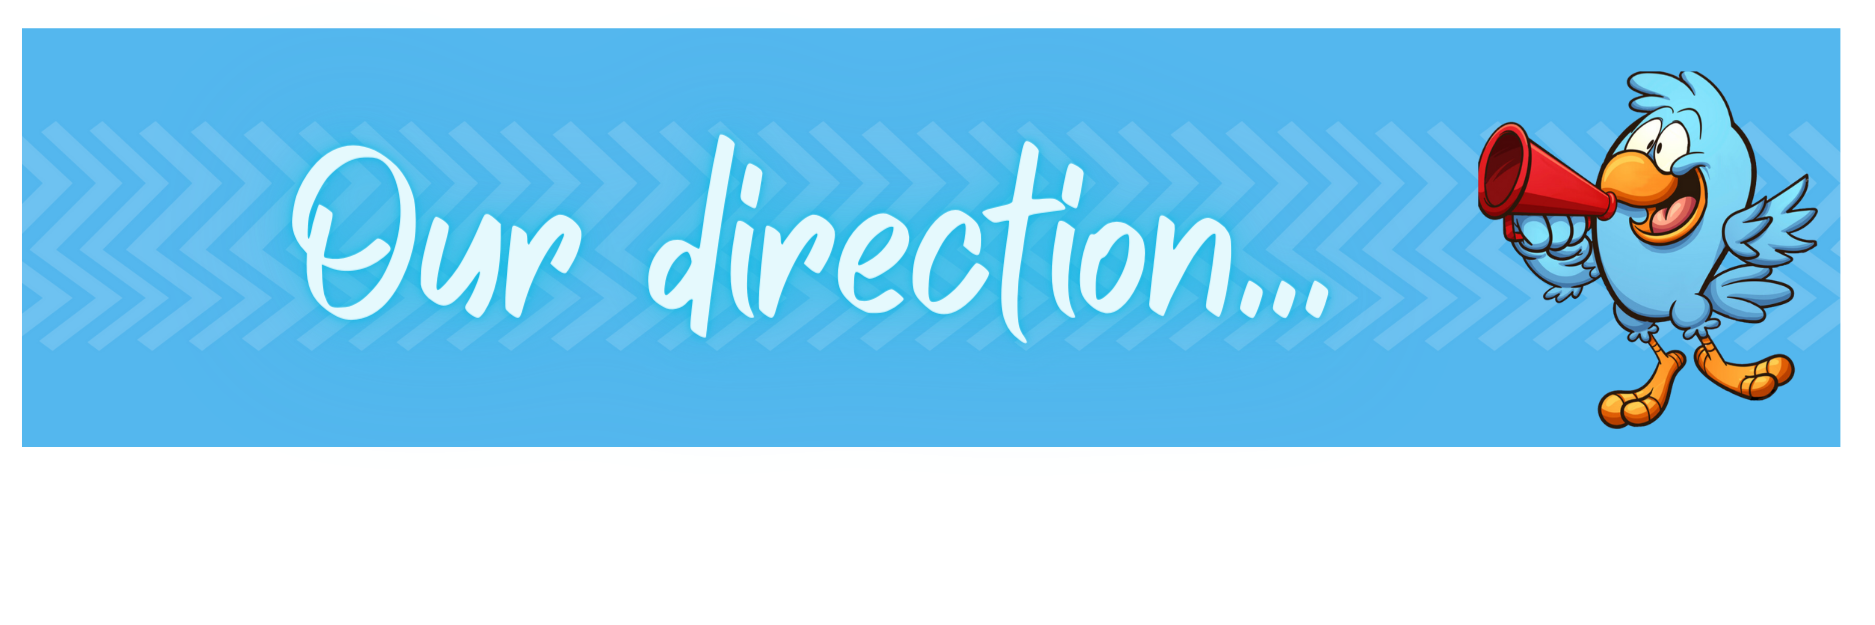 our direction